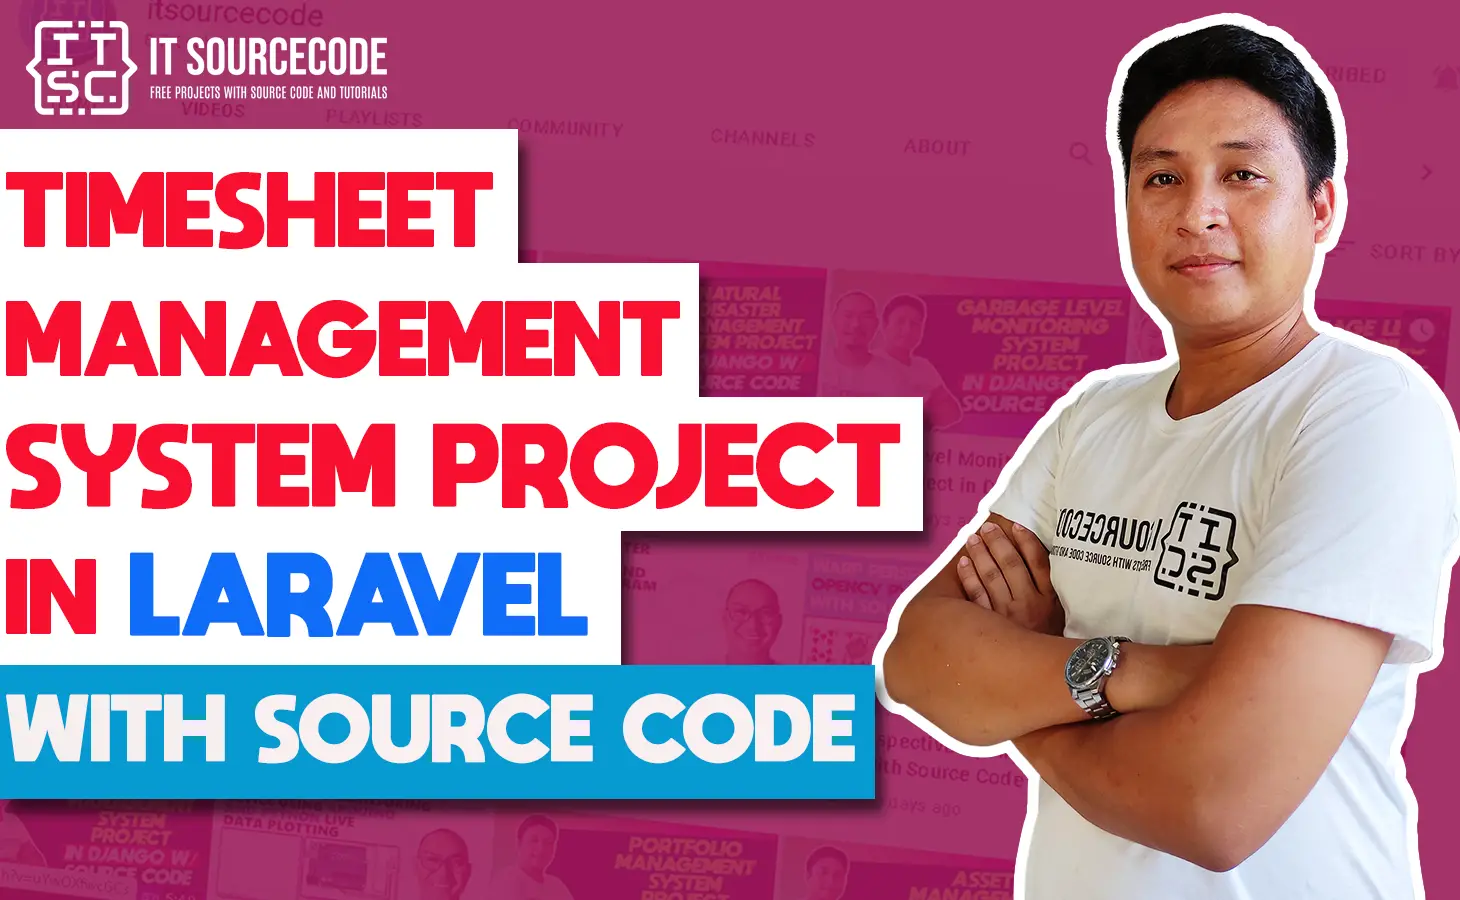 Timesheet Management System Project in Laravel with Source Code